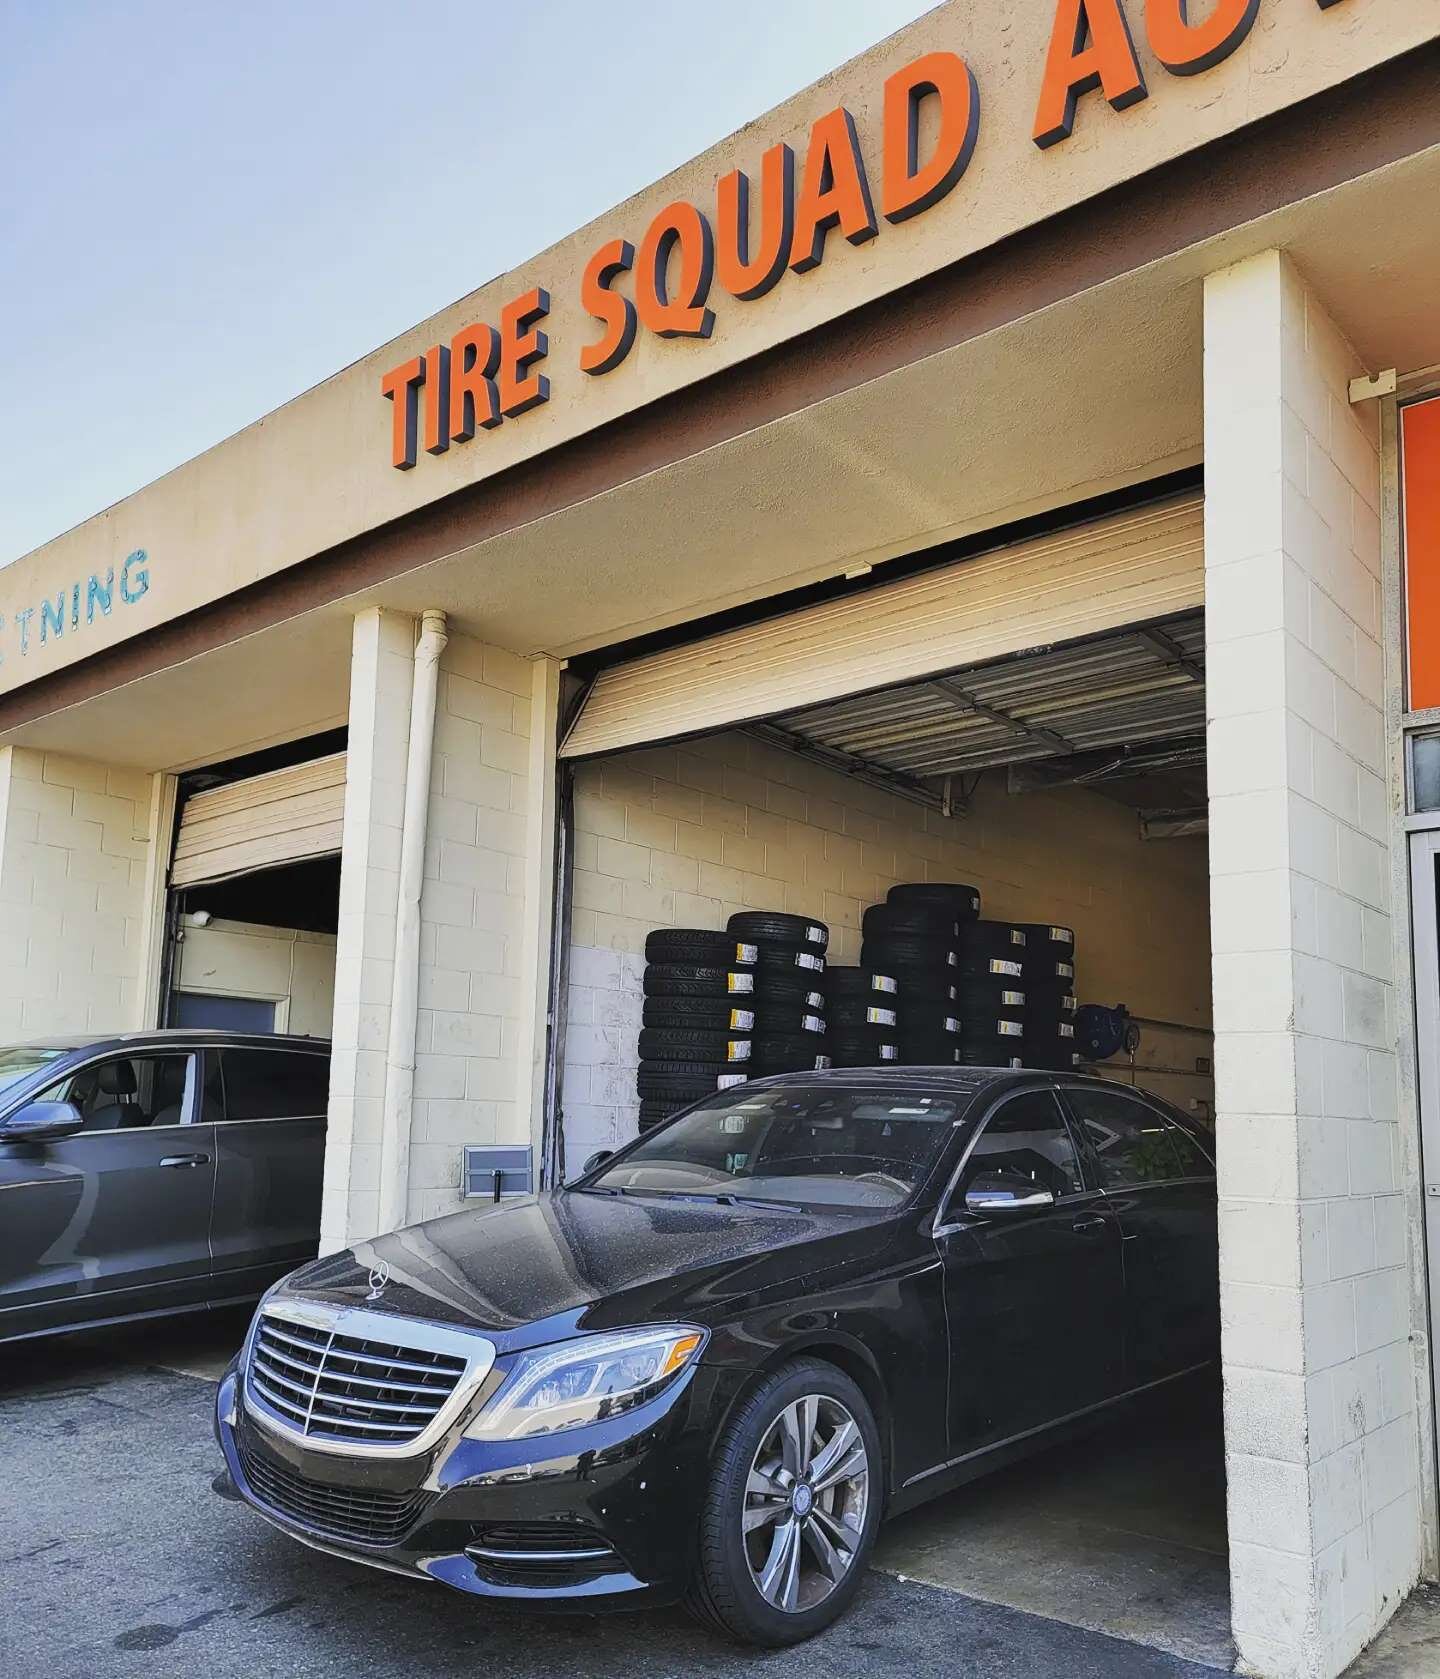 Fresh Continental ProContact run flats for this Mercedes S Class!
.
.
.
#tiresquad #continental #continentaltires #procontact #mercedesbenz #benz #mercedes #s550 #benzs550